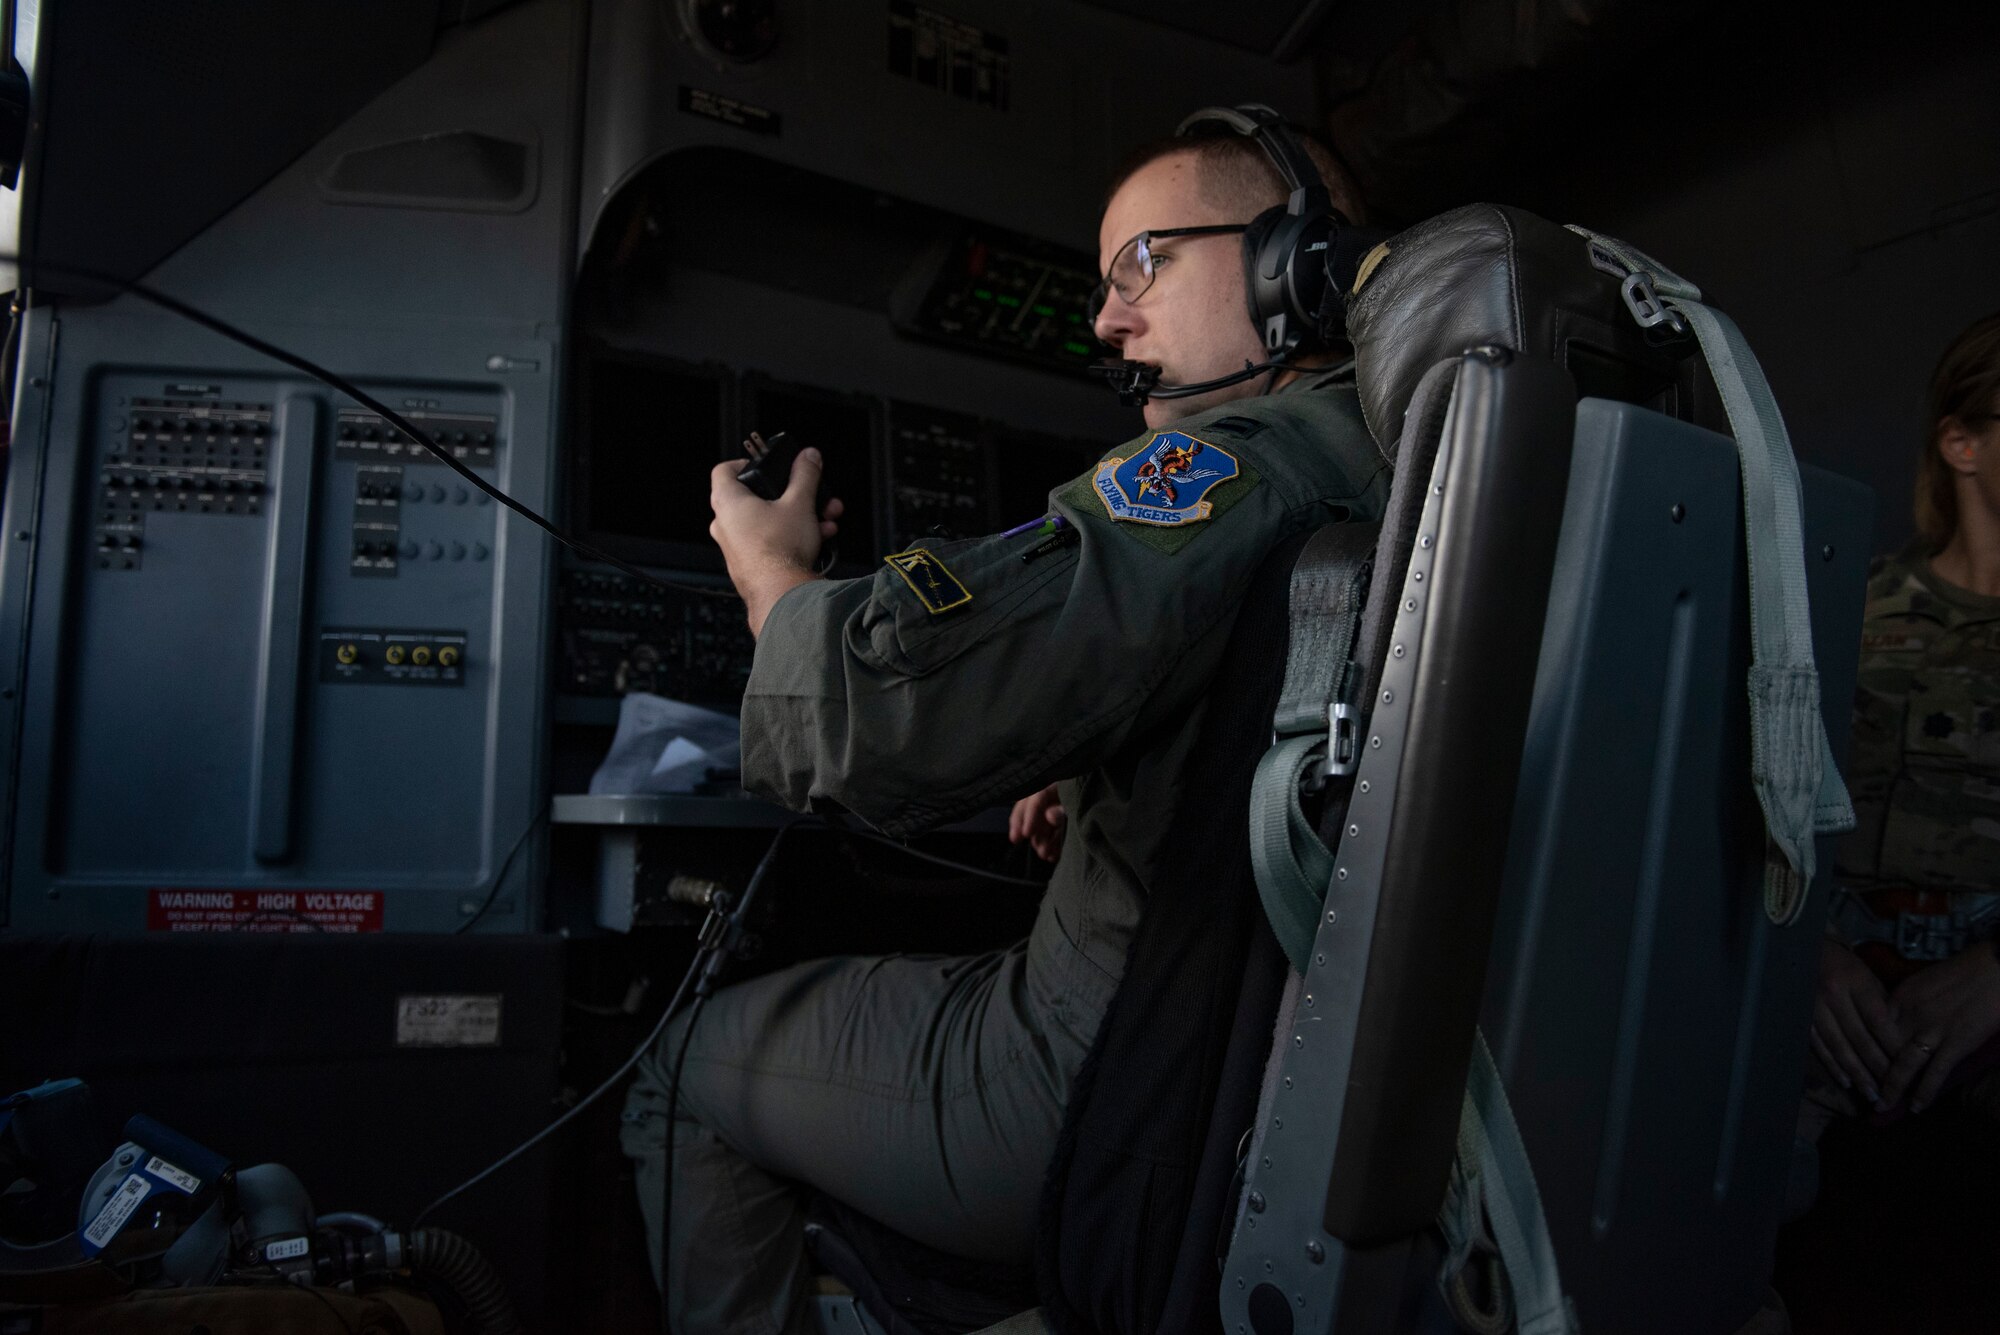 U.S. Air Force Captain David Saunders, 71st Rescue Squadron combat systems officer, operates CSO equipment on an HC-130J Combat King II above Moody Air Force Base, Georgia, Oct. 26, 2023. A CSO provides U.S. Air Force aircraft with a variety of offensive and defensive capabilities to project force and maintain the safety of the aircraft and aircrew. (U.S. Air Force photo by Staff Sgt. Thomas Johns)